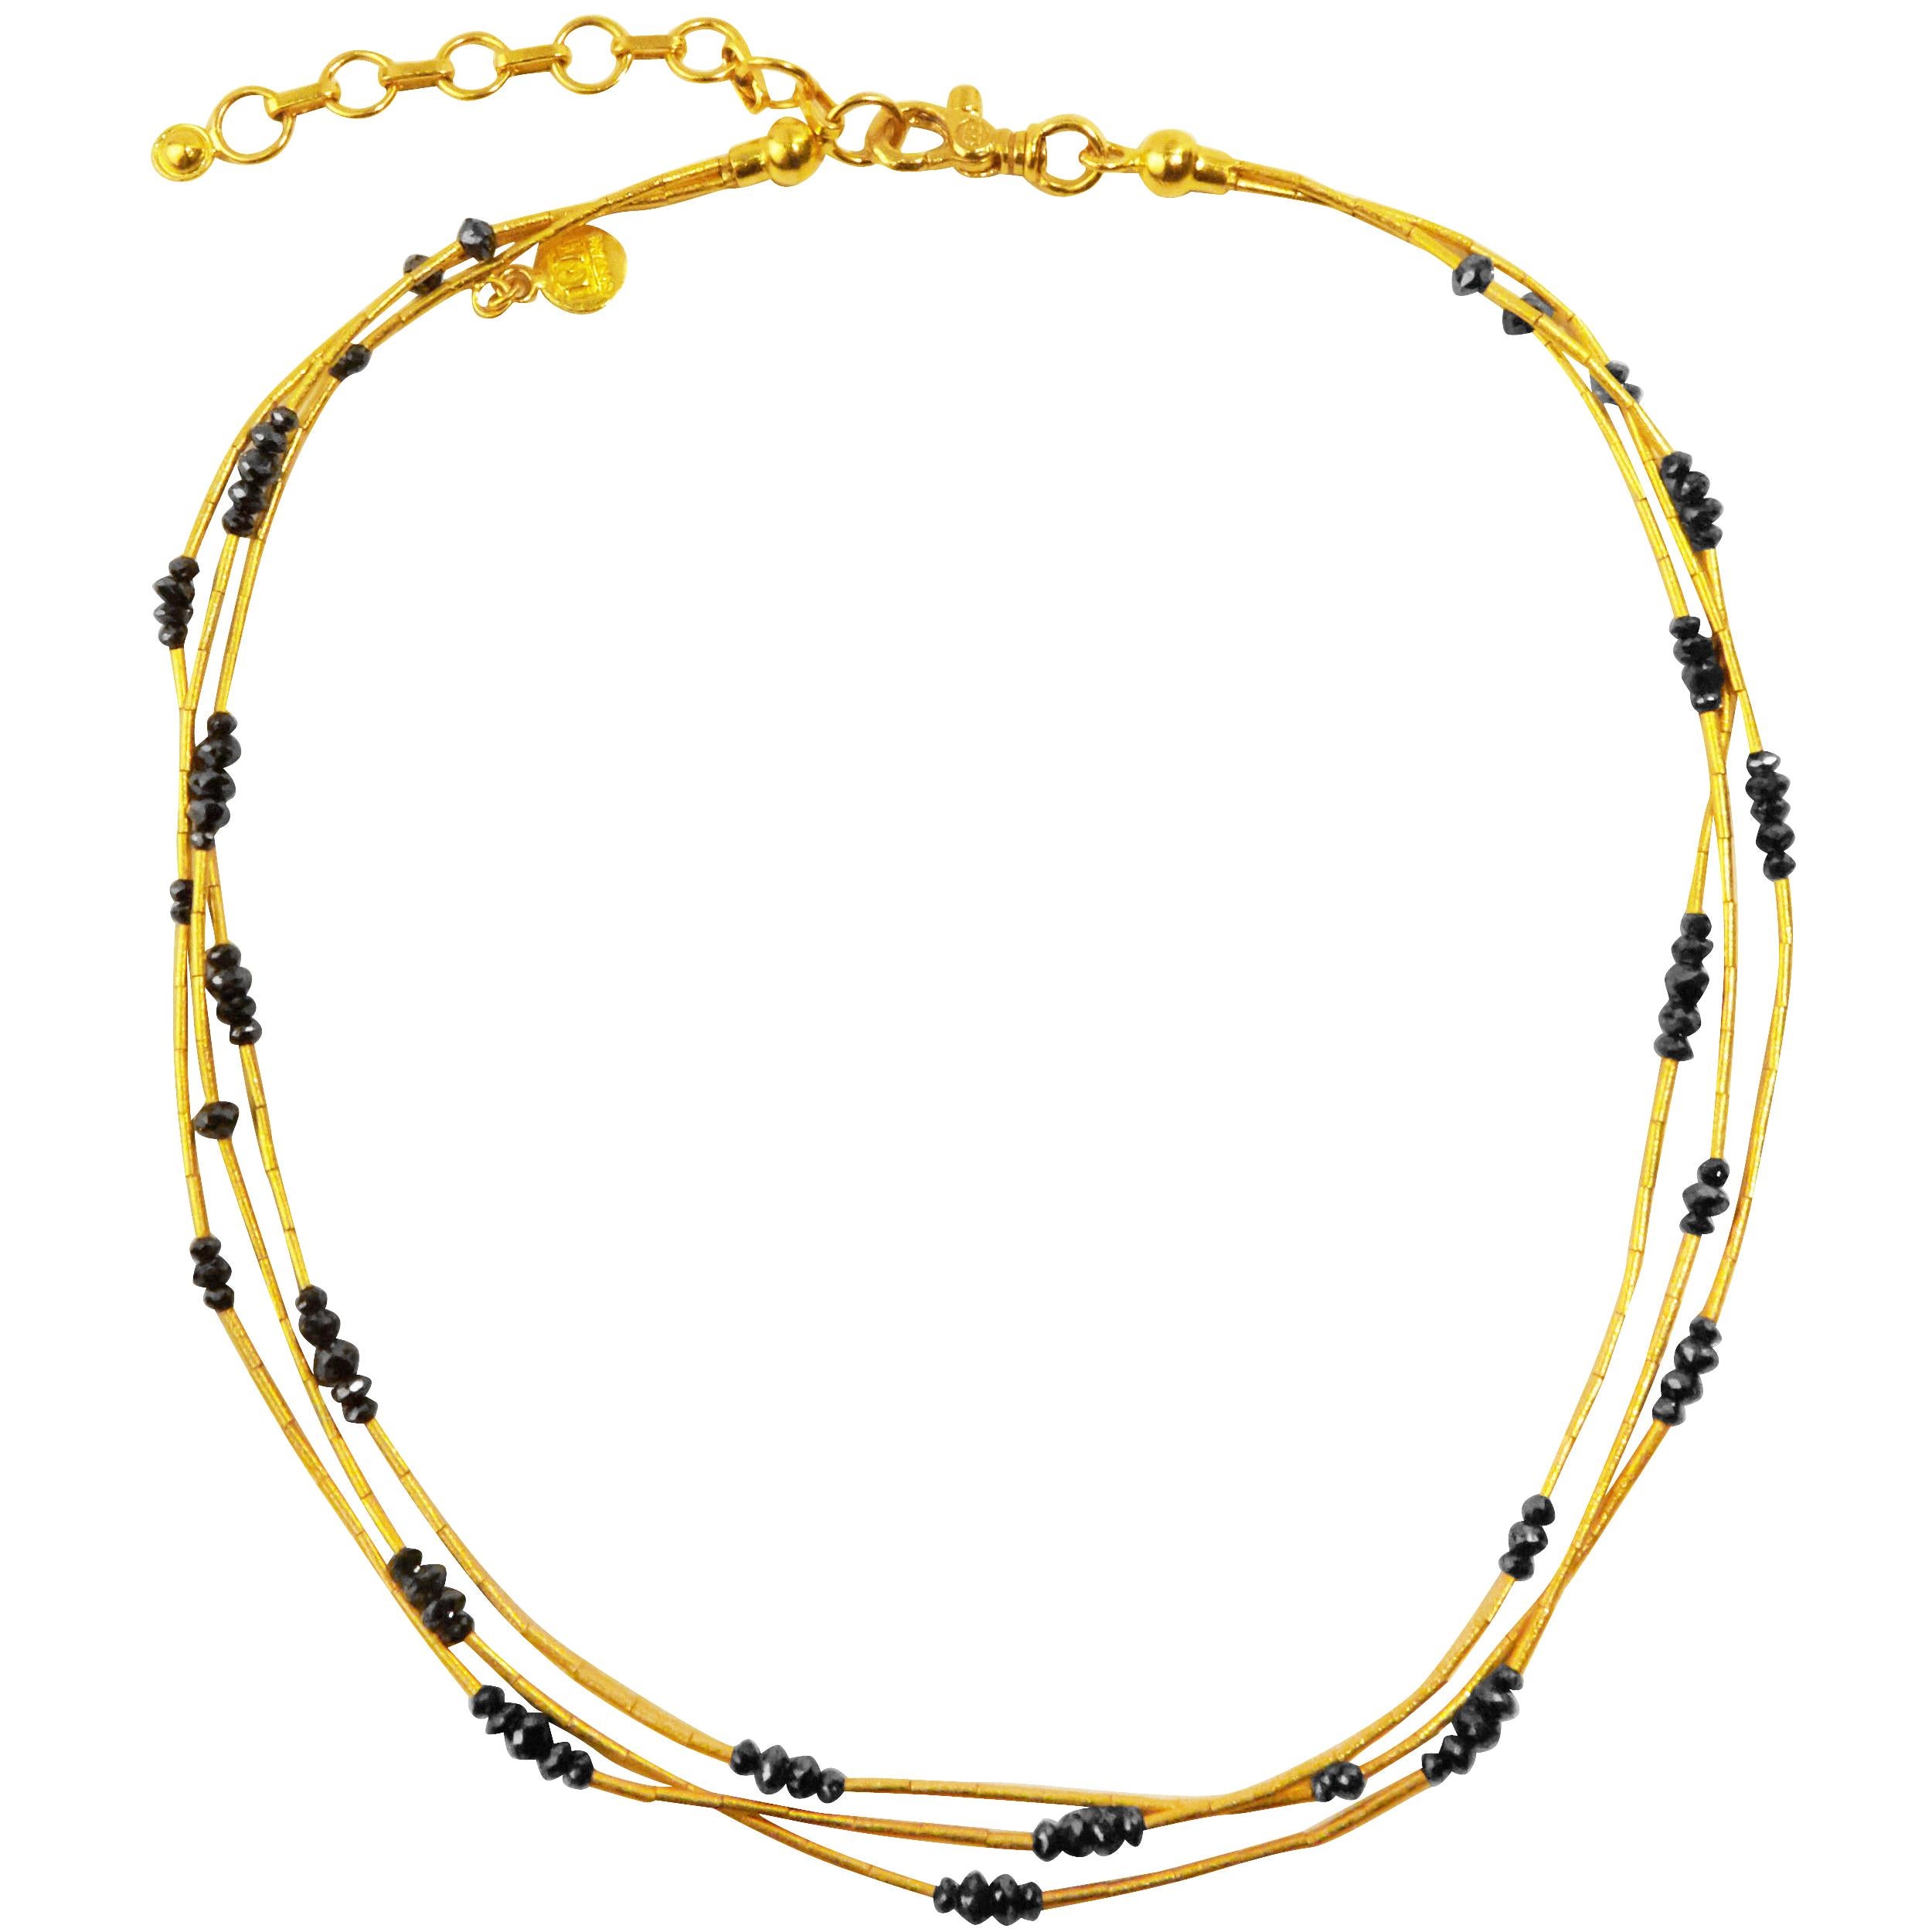 GURHAN Delicate Rain triple strand multi cluster station necklace in 24 Karat yellow gold featuring mixed sized black diamond beads, 14.00cts. 16-18